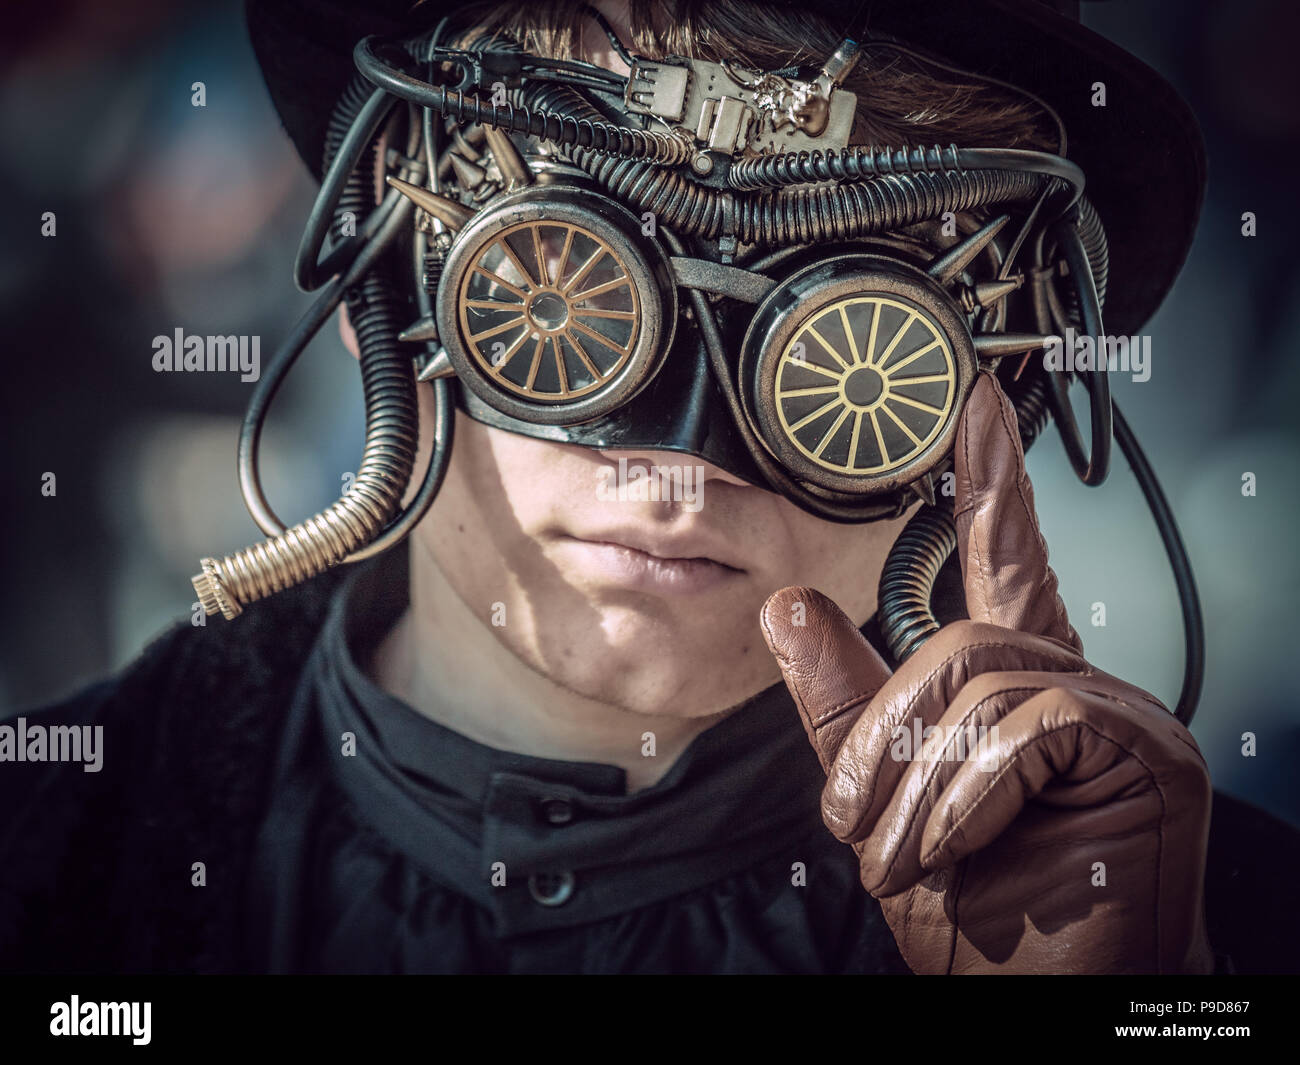 Man in steampunk costume at the Venice Carnival Stock Photo